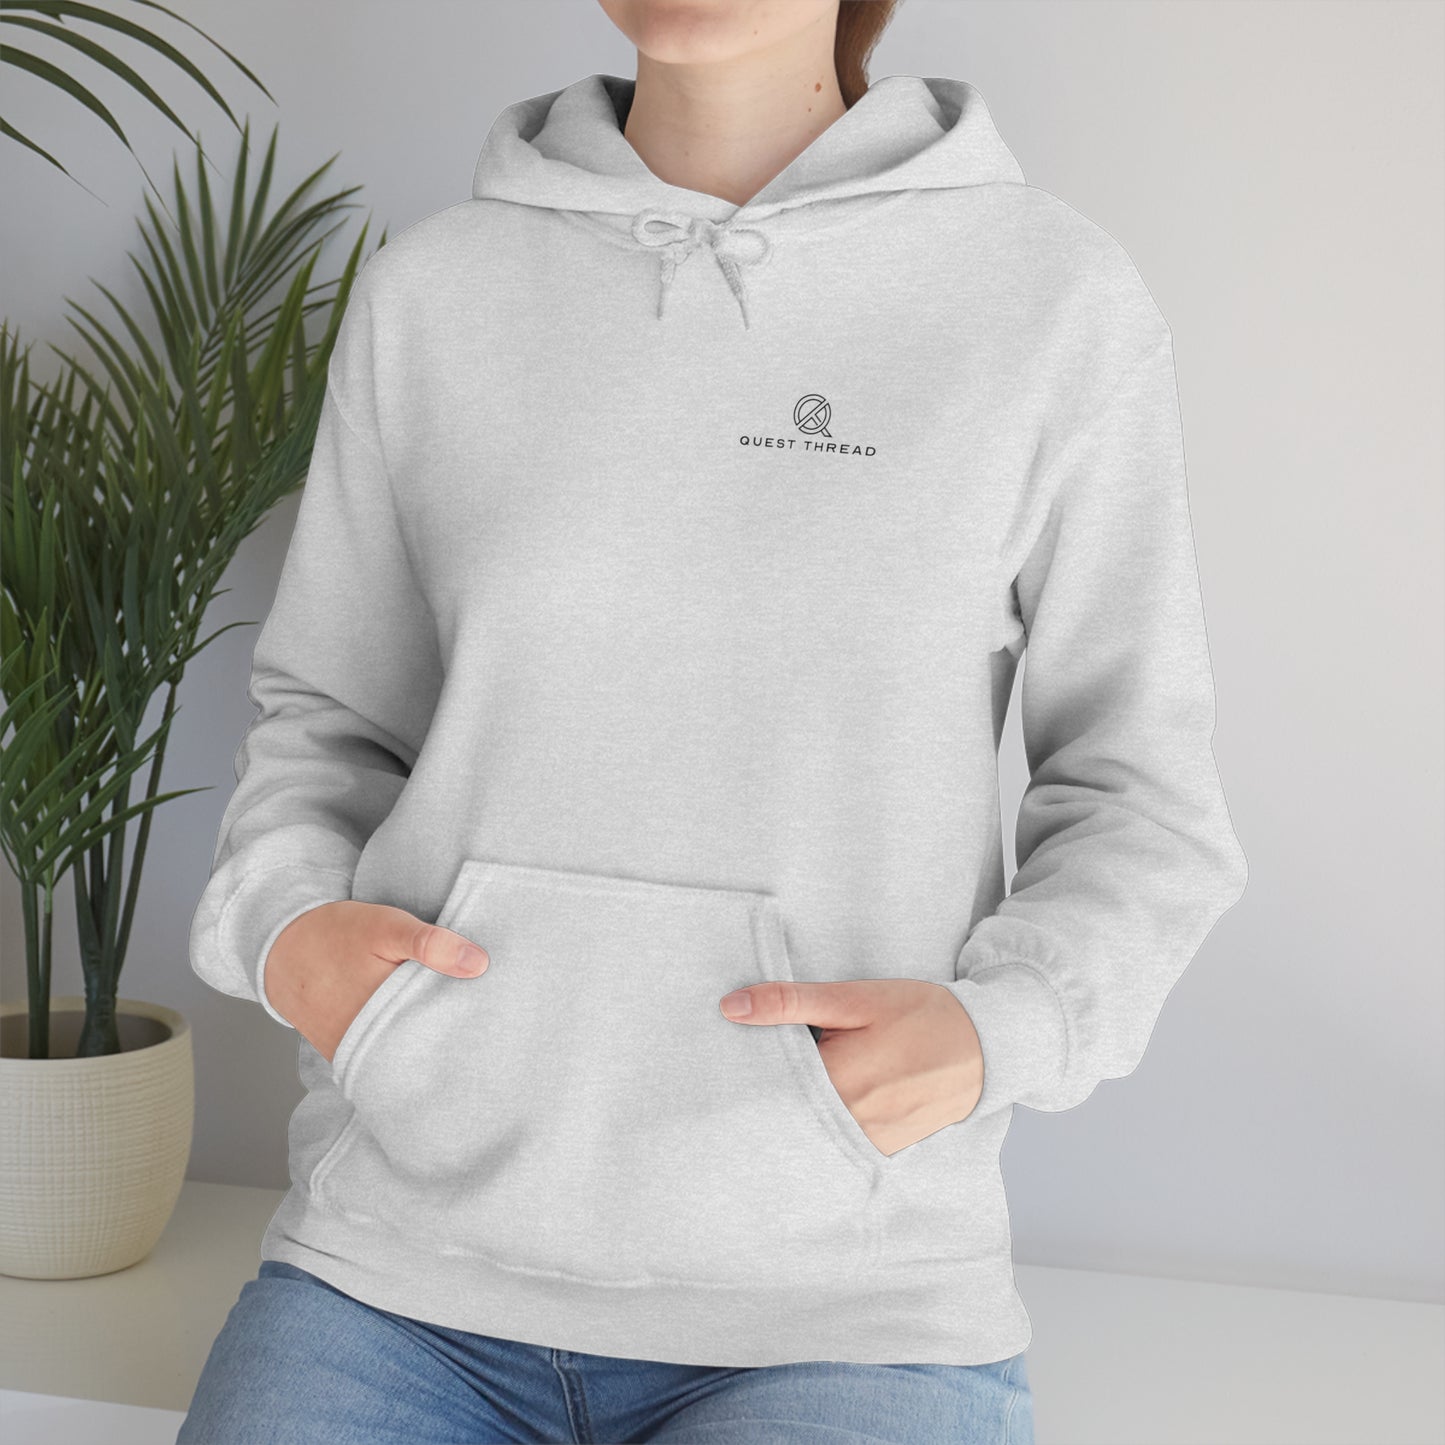 ash-quest-thread-hoodie-with-small-logo-on-left-chest